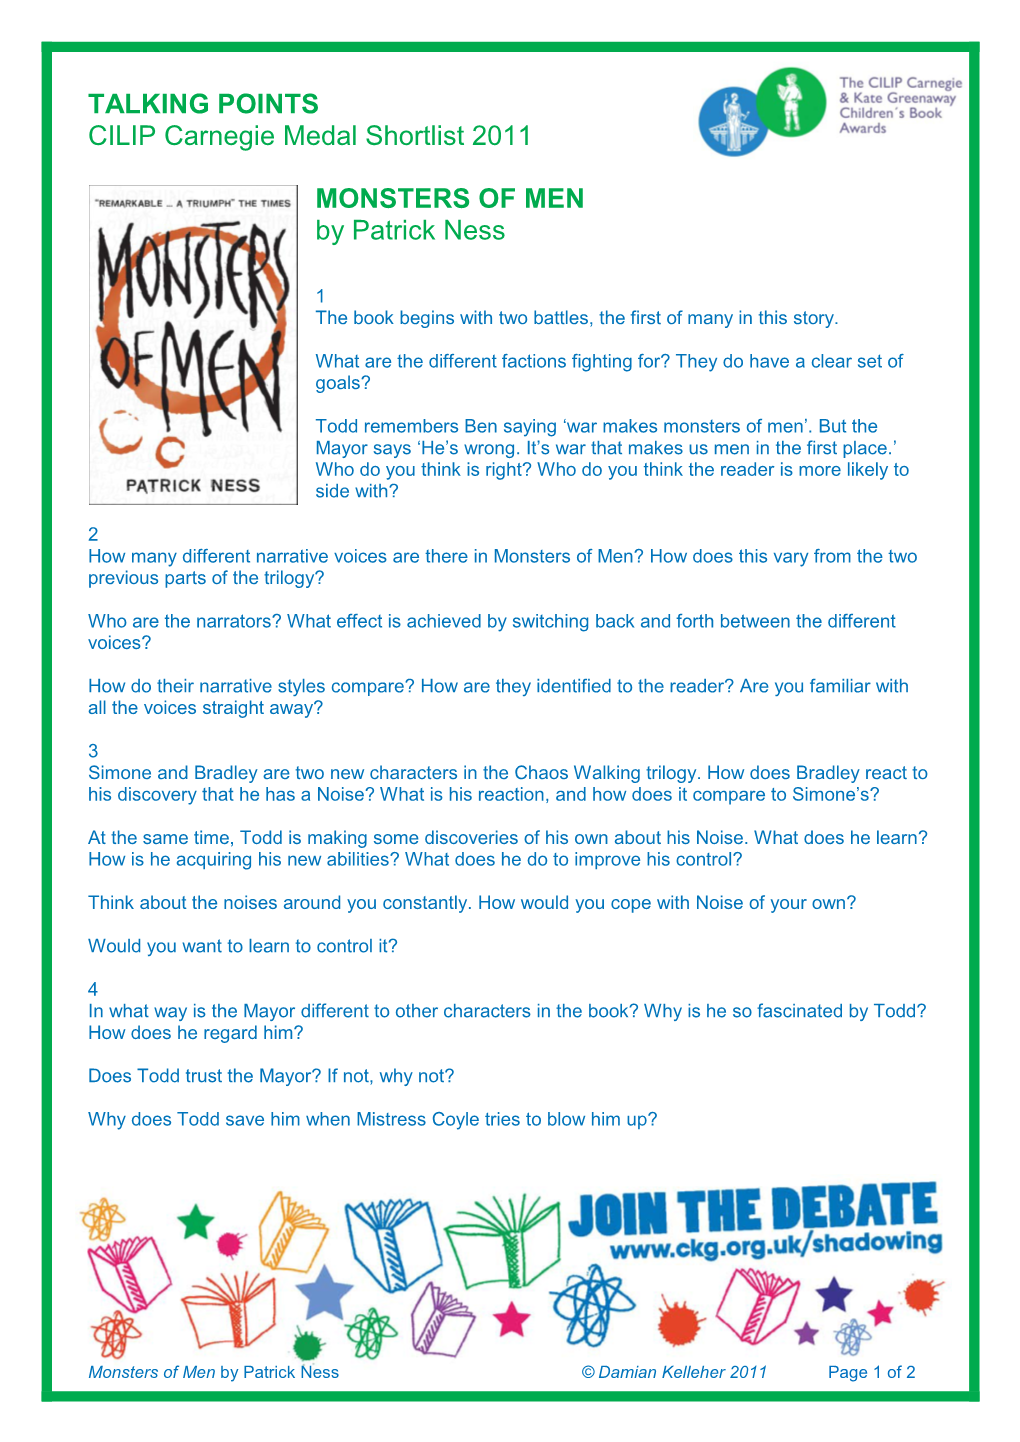 MONSTERS of MEN by Patrick Ness